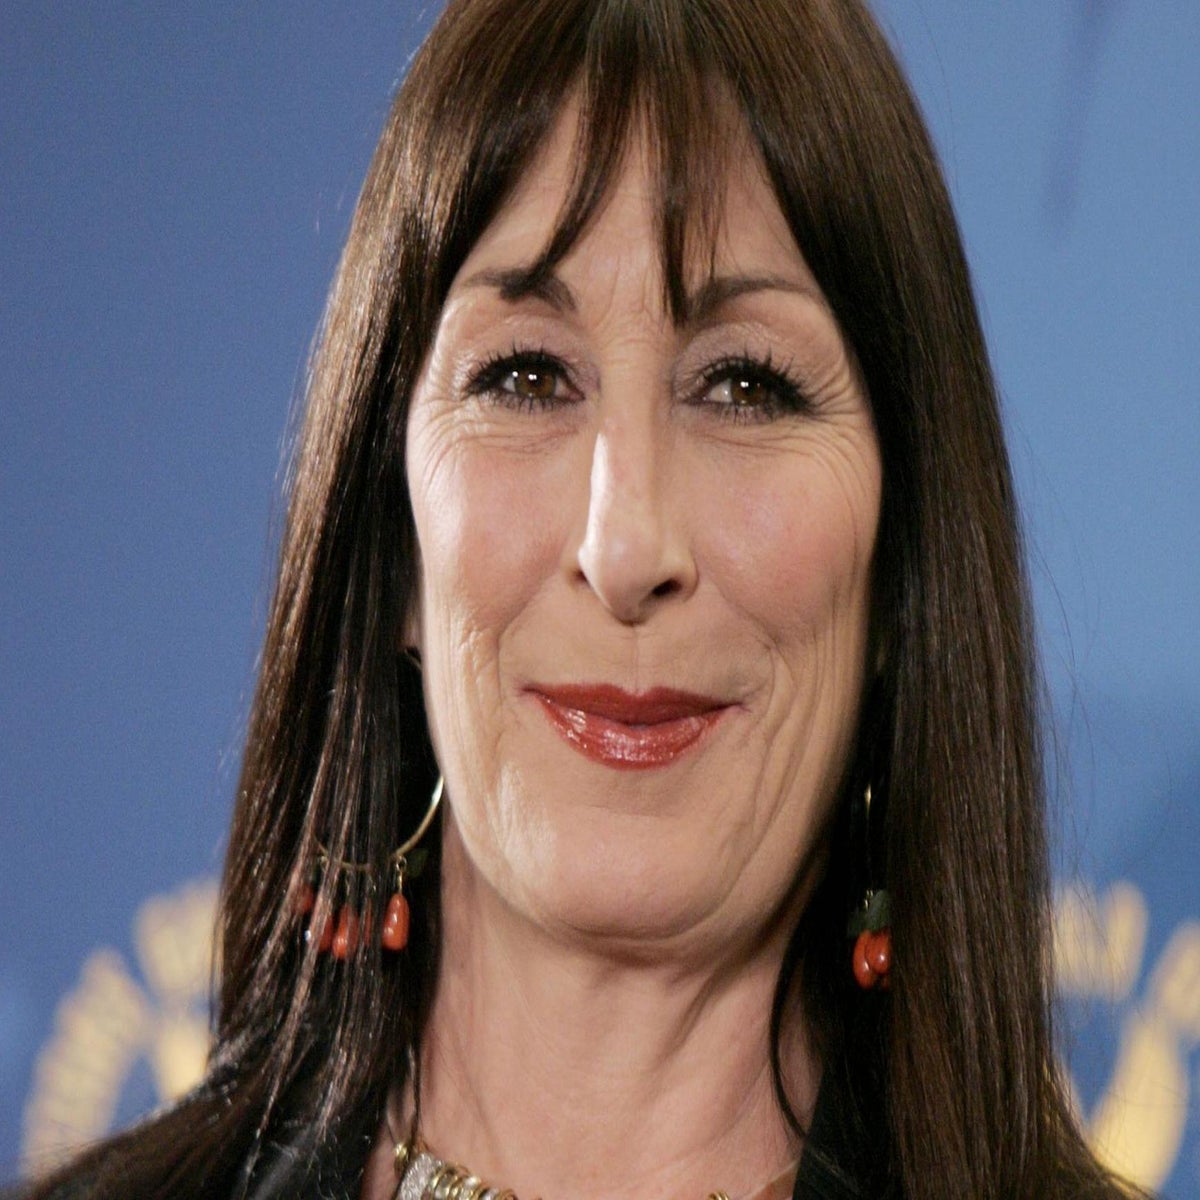 Anjelica Porn Star - Anjelica Huston takes down Robert De Niro and Diane Keaton in remarkable  new interview | The Independent | The Independent